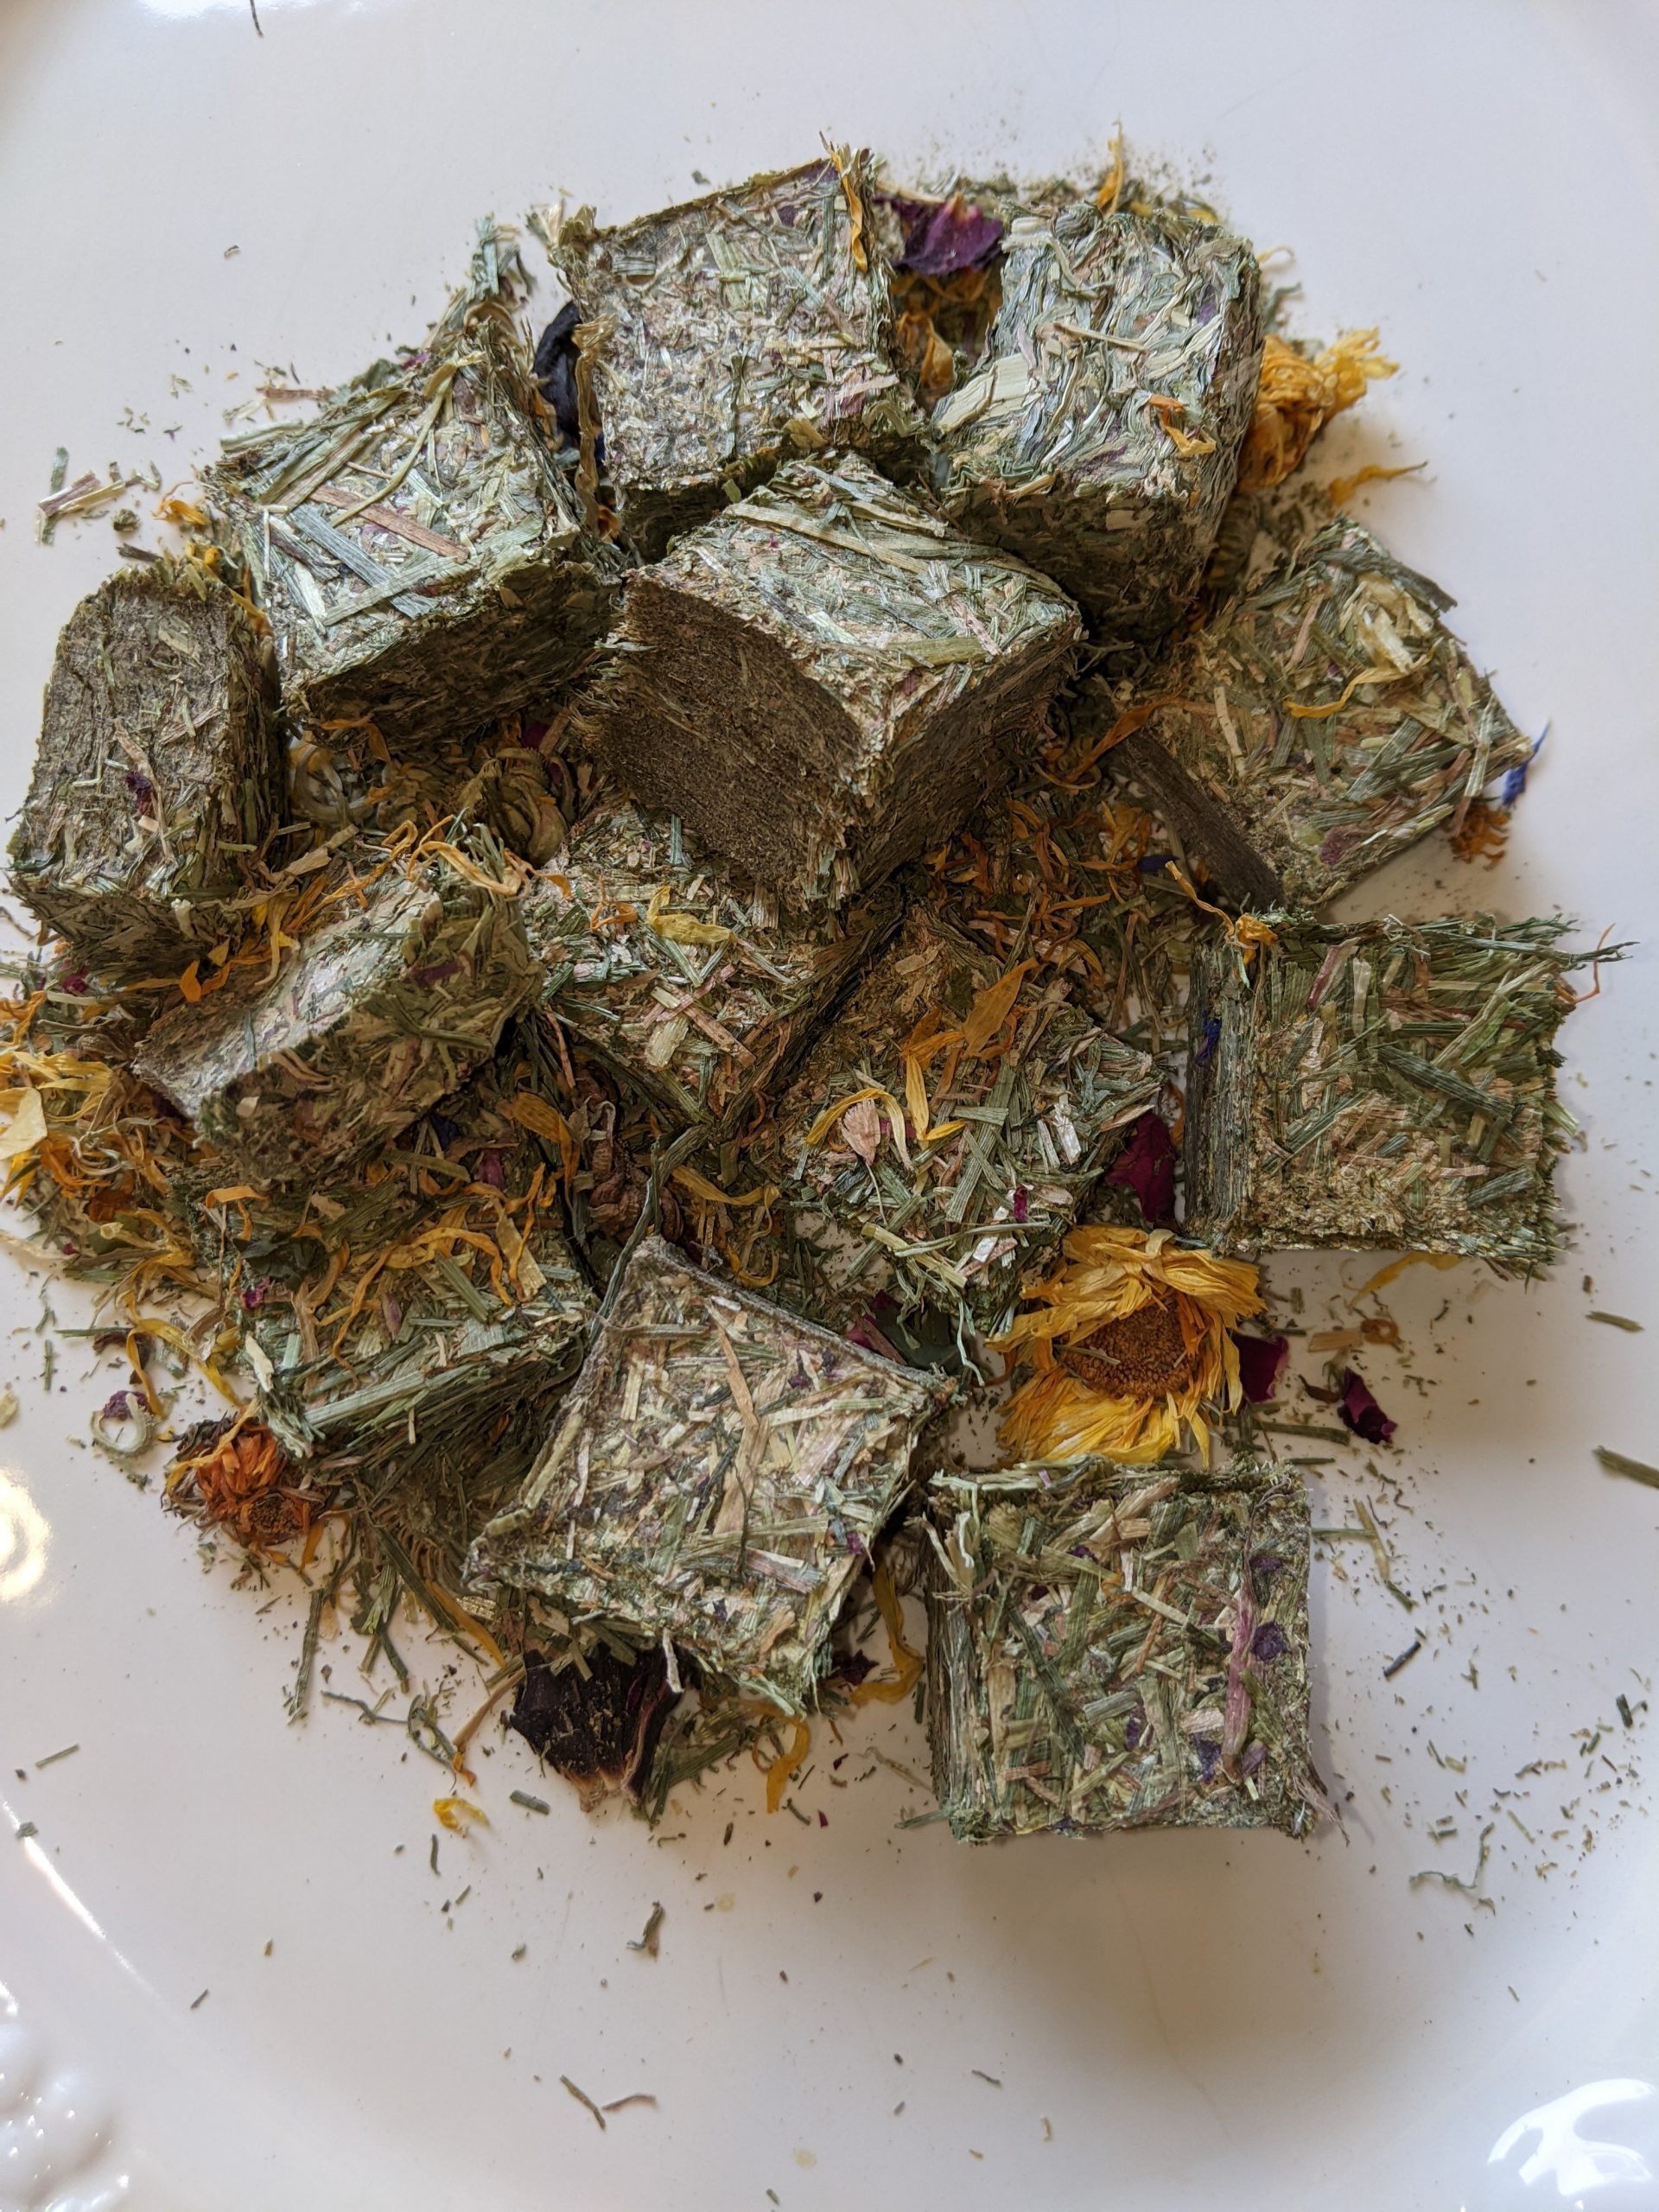 Ginkgo in loose leaf form, from Kapidolo Farms, offers a unique dietary option for tortoises.